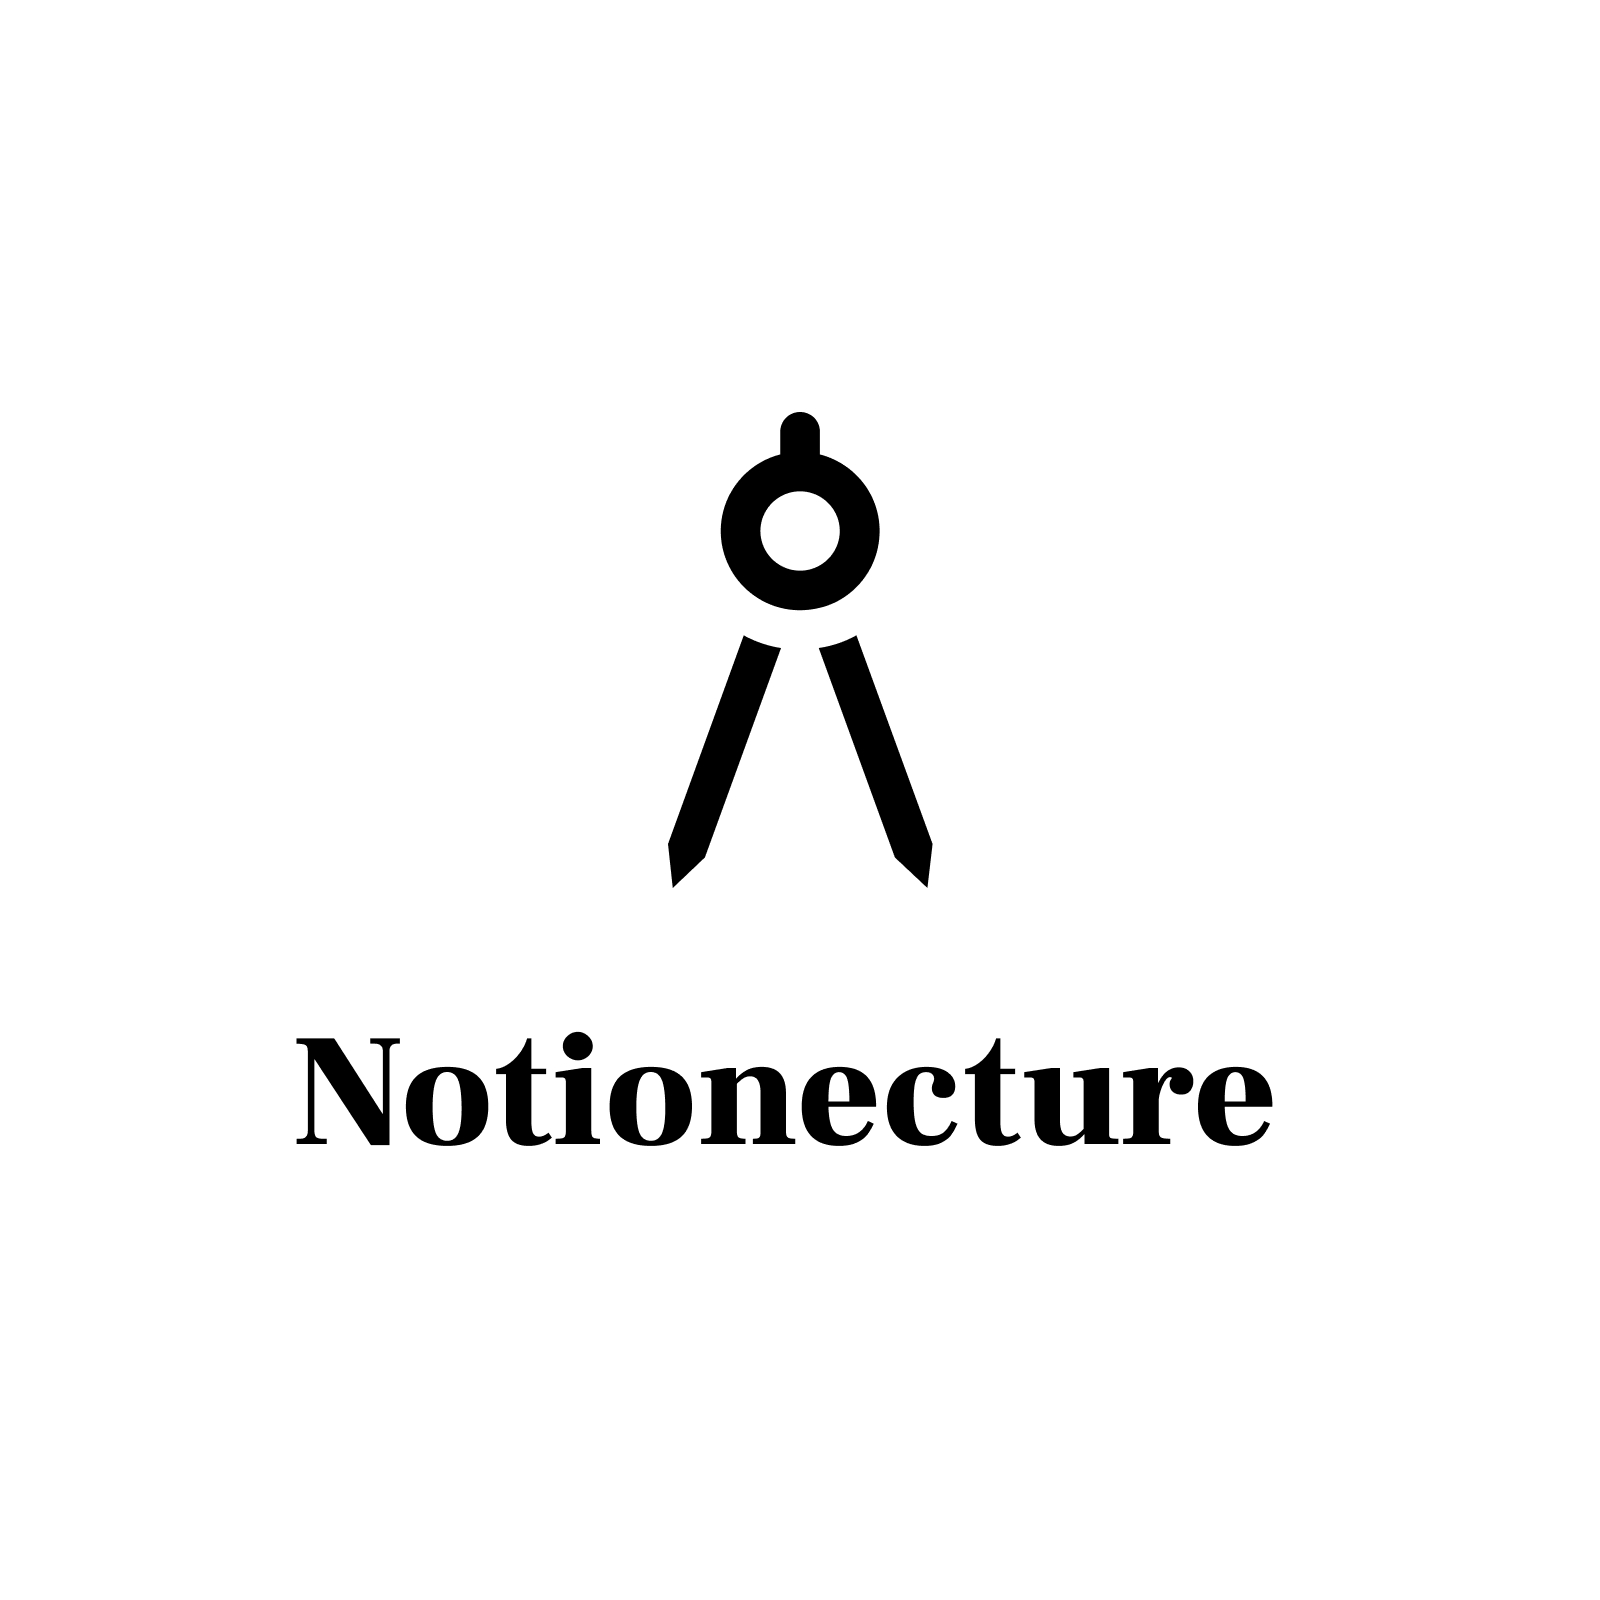 Profile image for notionecture